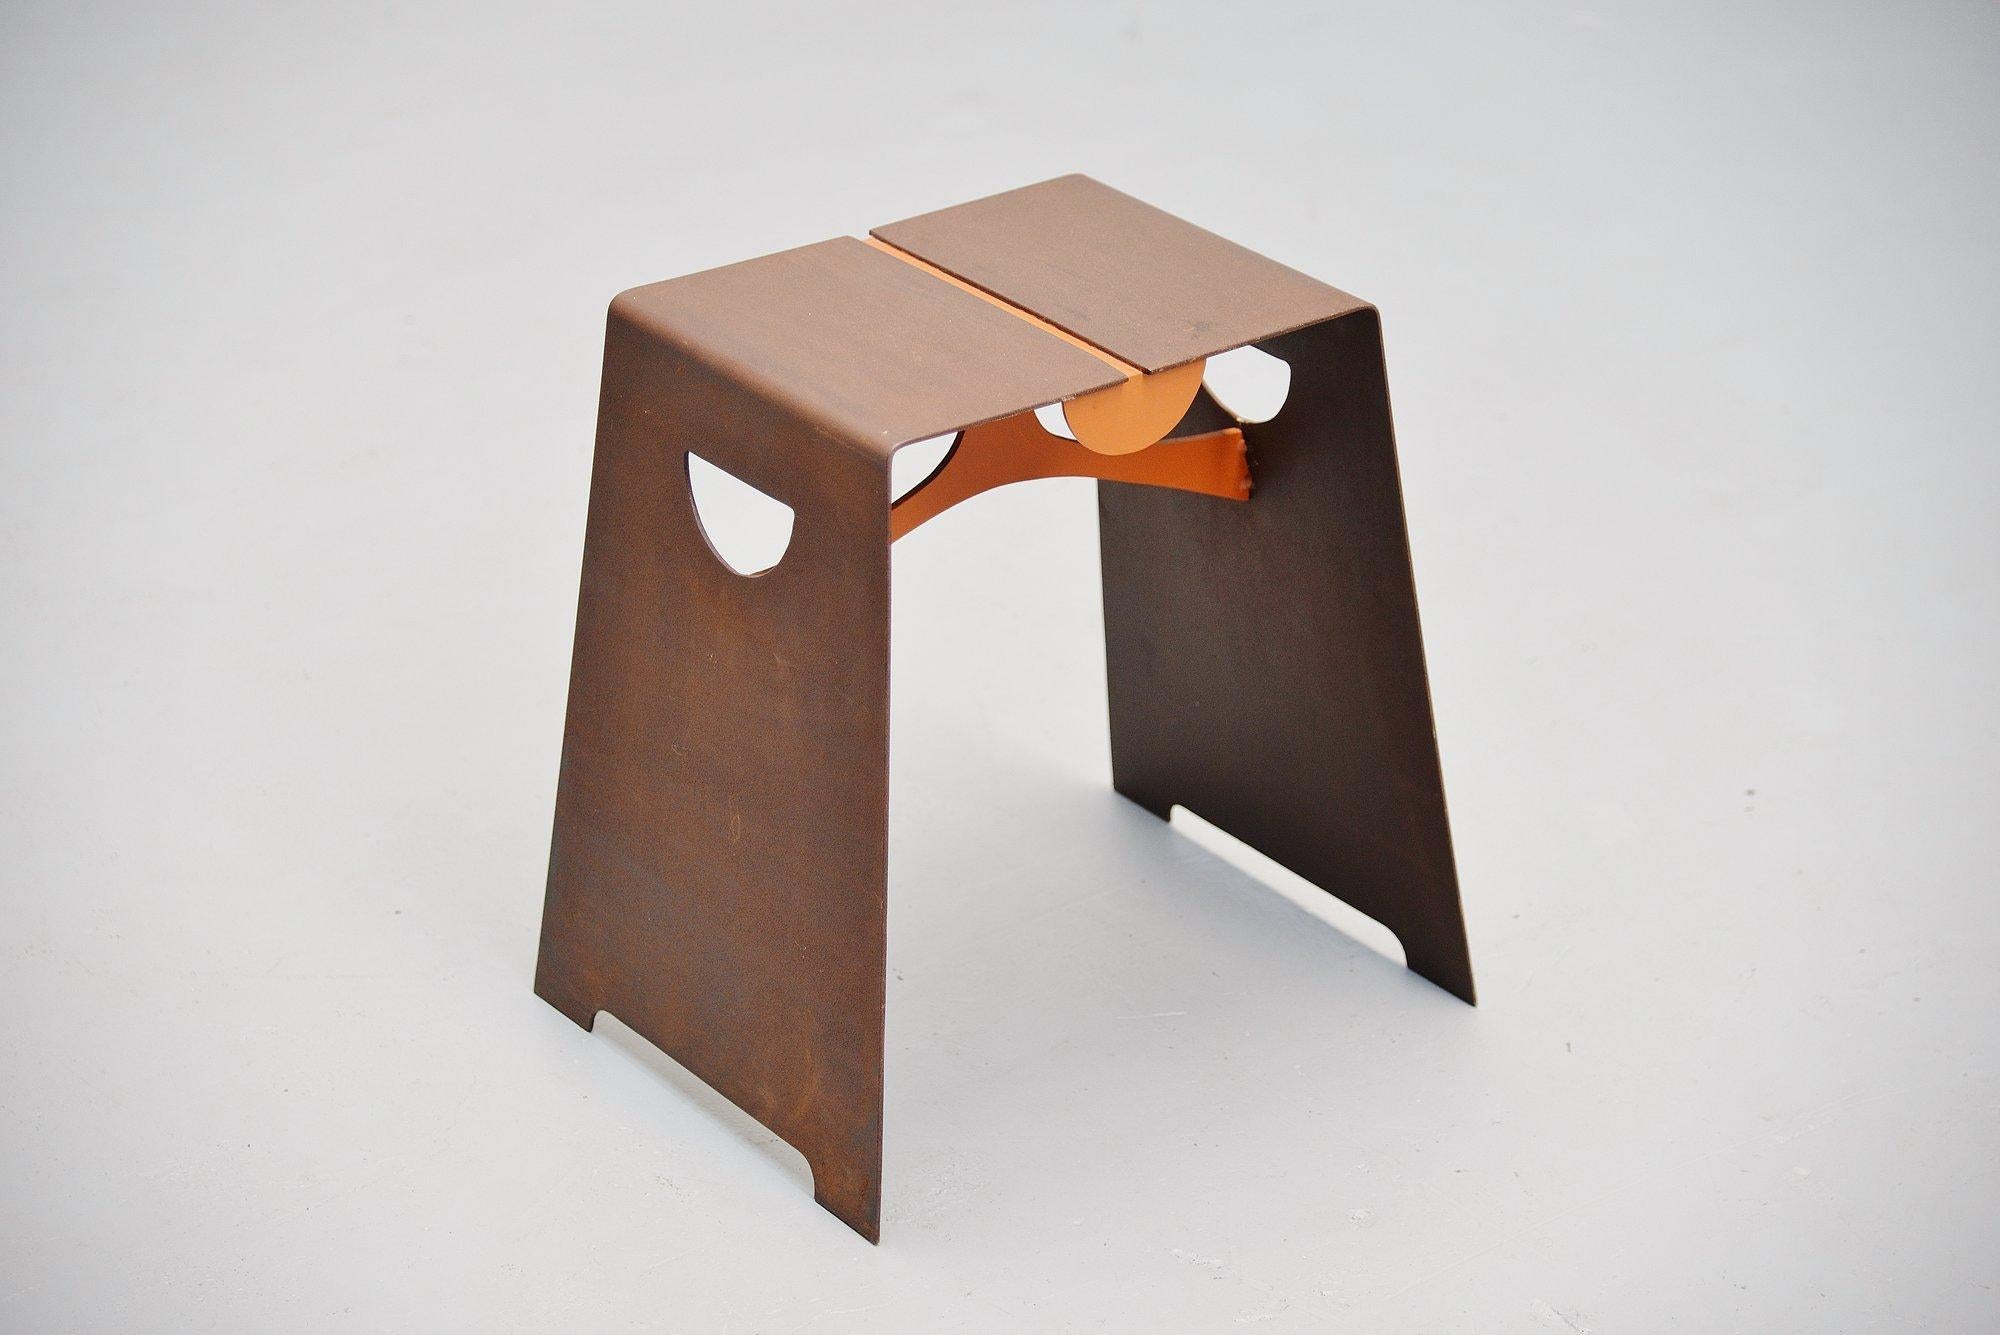 Very nicely shaped Bossche school designed stool, Holland, 1970. This stool was made or steel and is typically for de Bossche school. Very similar design to the pieces by Dom Hans van der Laan. This stool is completely made of sheet steel and is